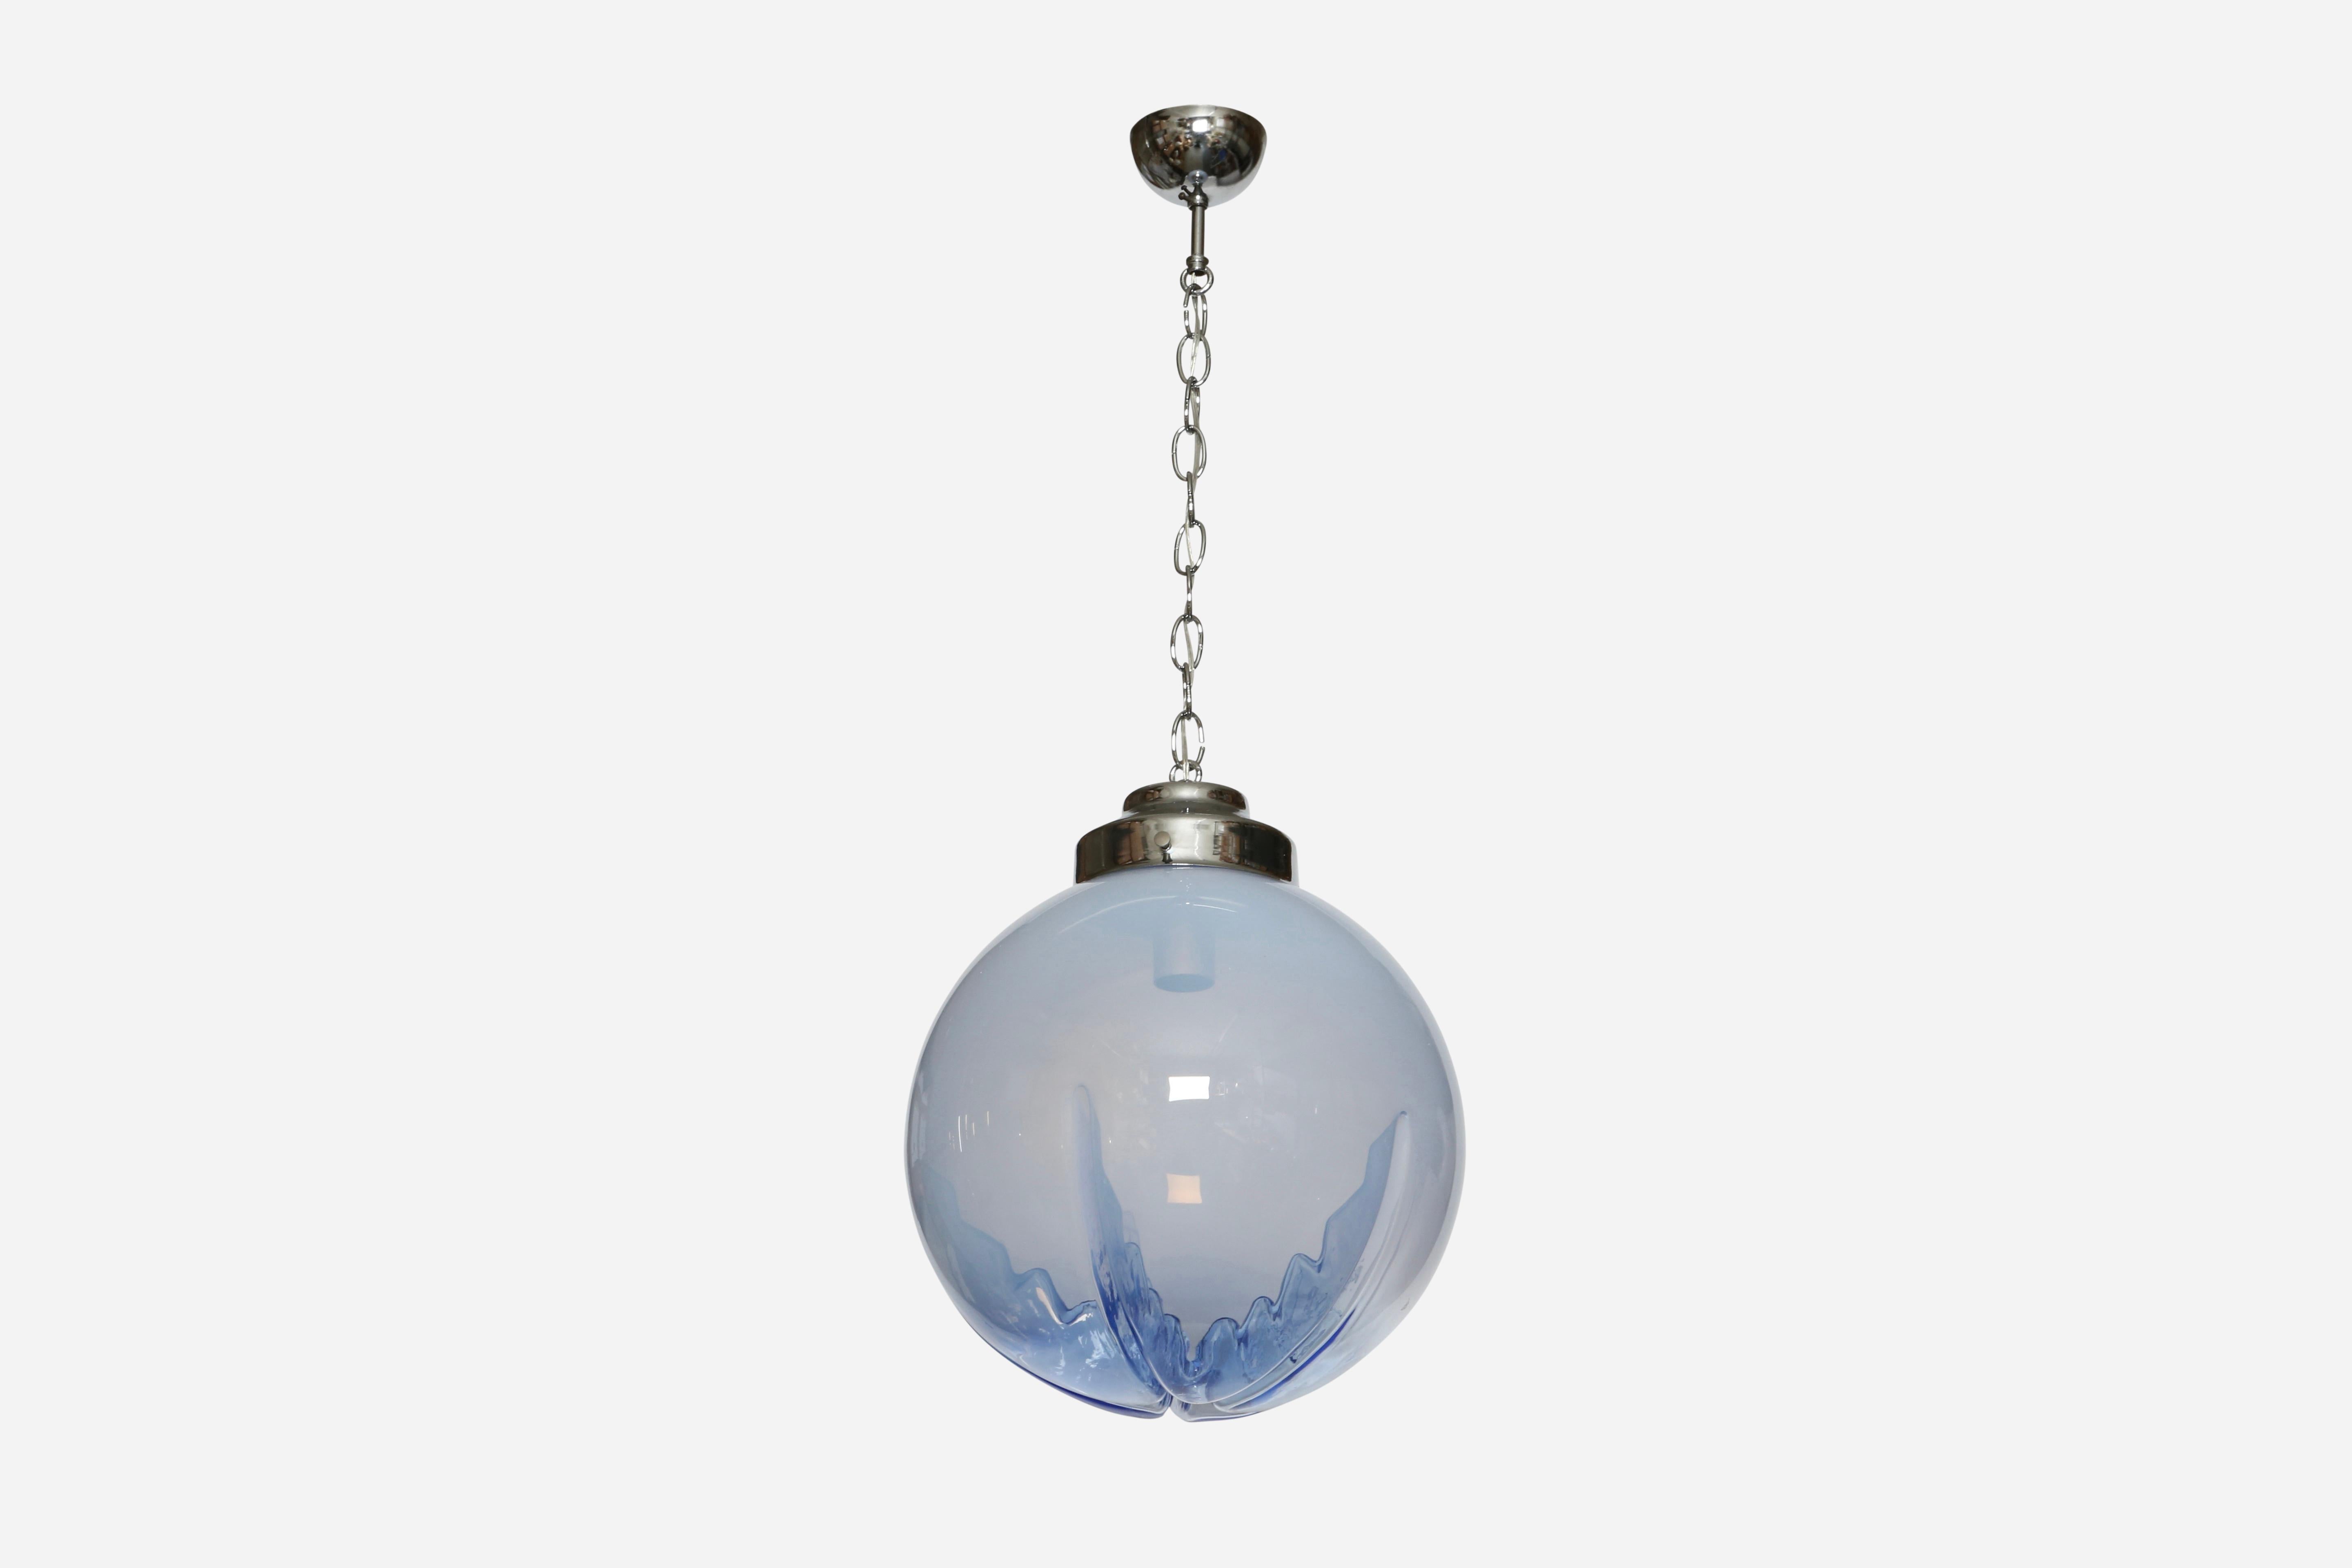 Murano ceiling pendant by Mazzega
Designed and manufactured in Italy in 1960s
Handblown glass, chrome plated metal
Height adjustable.
Takes one medium base bulb.
Complimentary US rewiring upon request.

We take pride in bringing vintage fixtures to